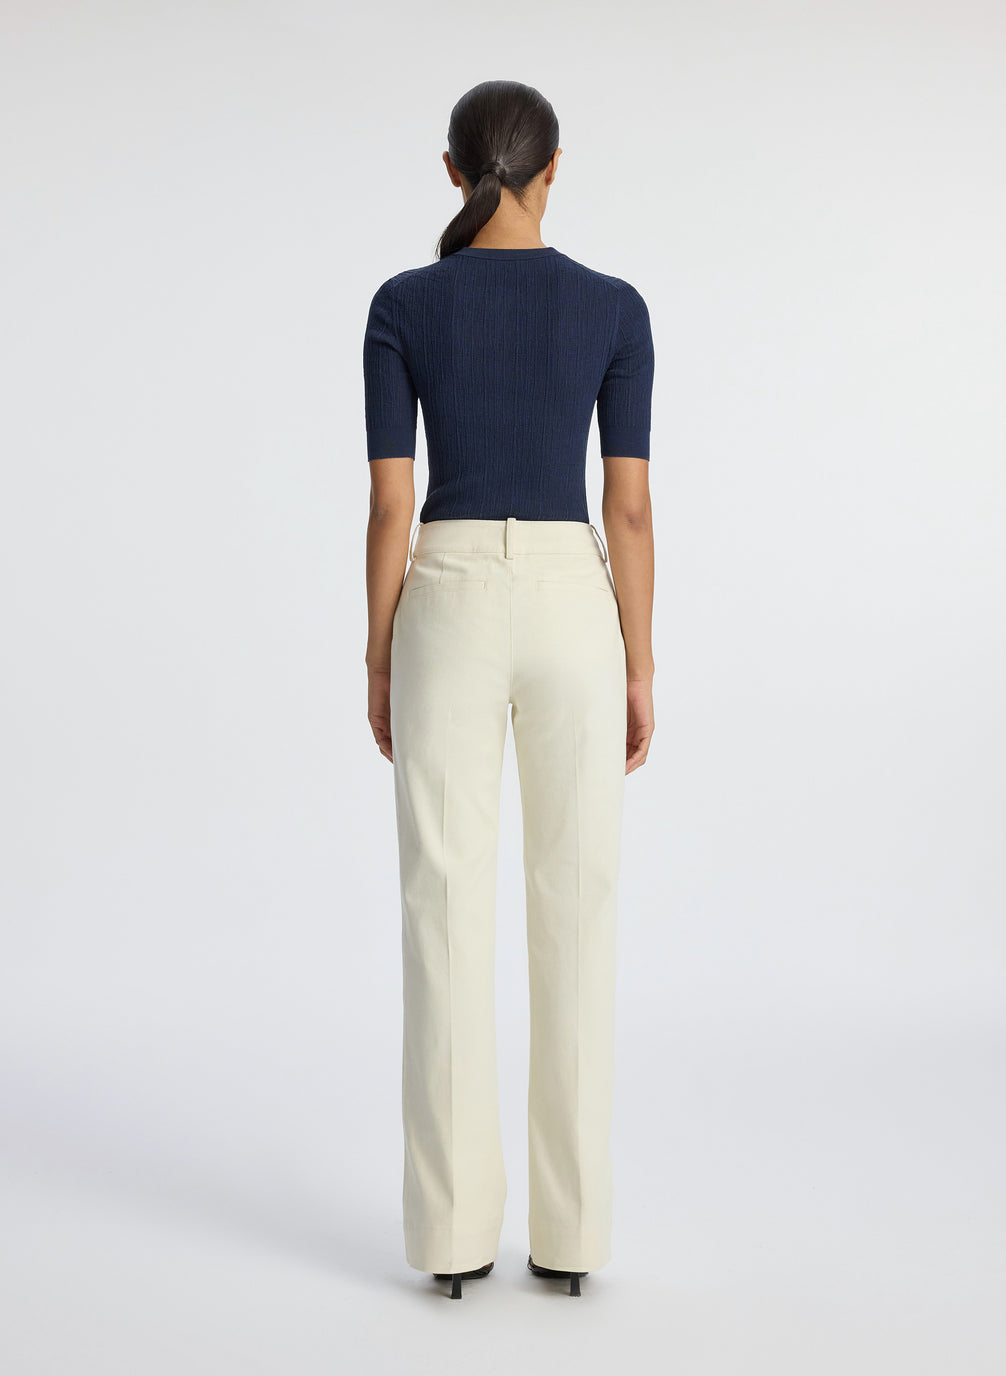 back view of woman wearing navy blue half sleeve button placket shirt and cream pants